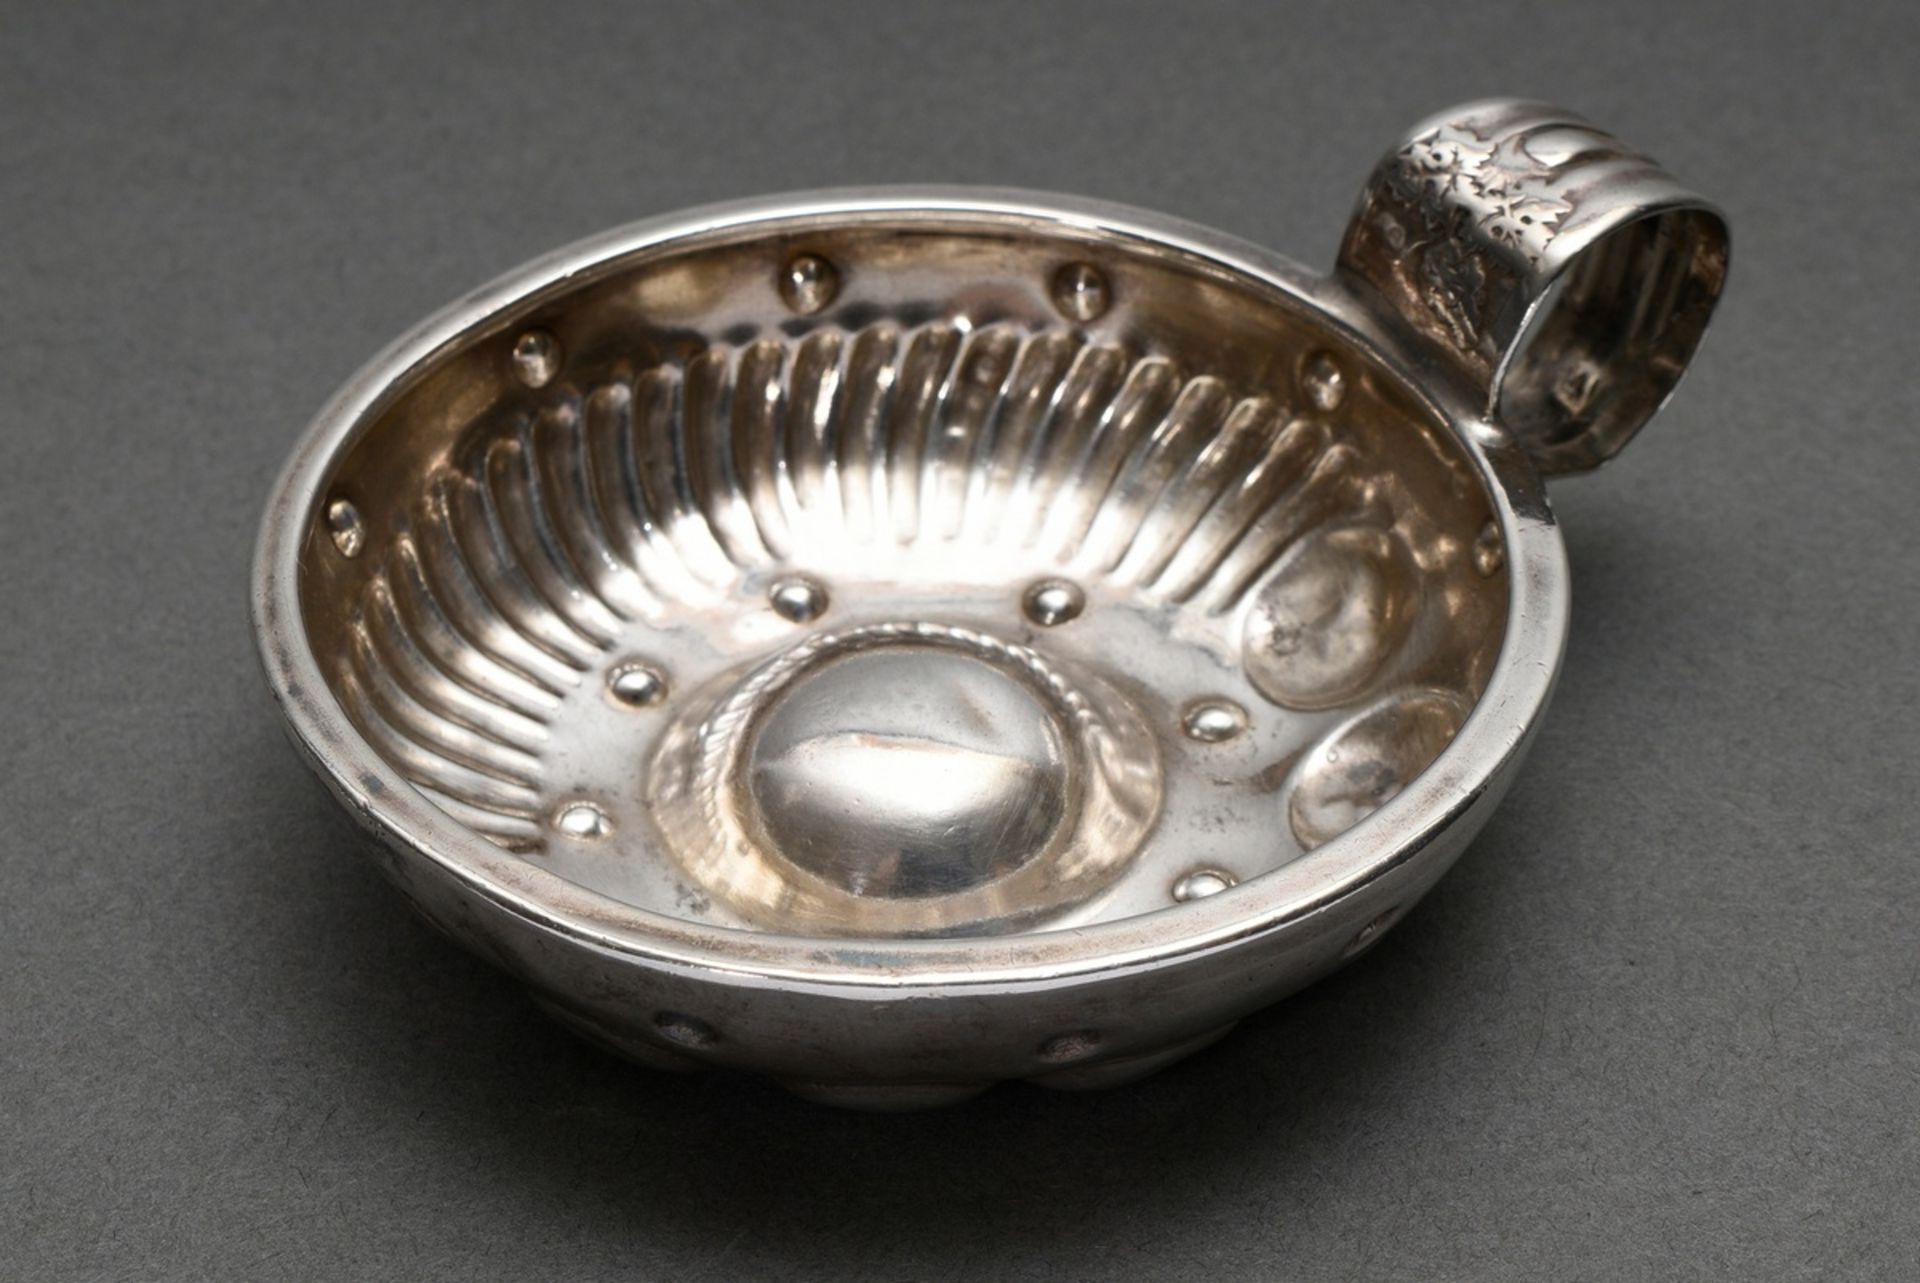 French Tastevin bowl with half humped and half fluted wall and wide ring handle with vine leaf reli